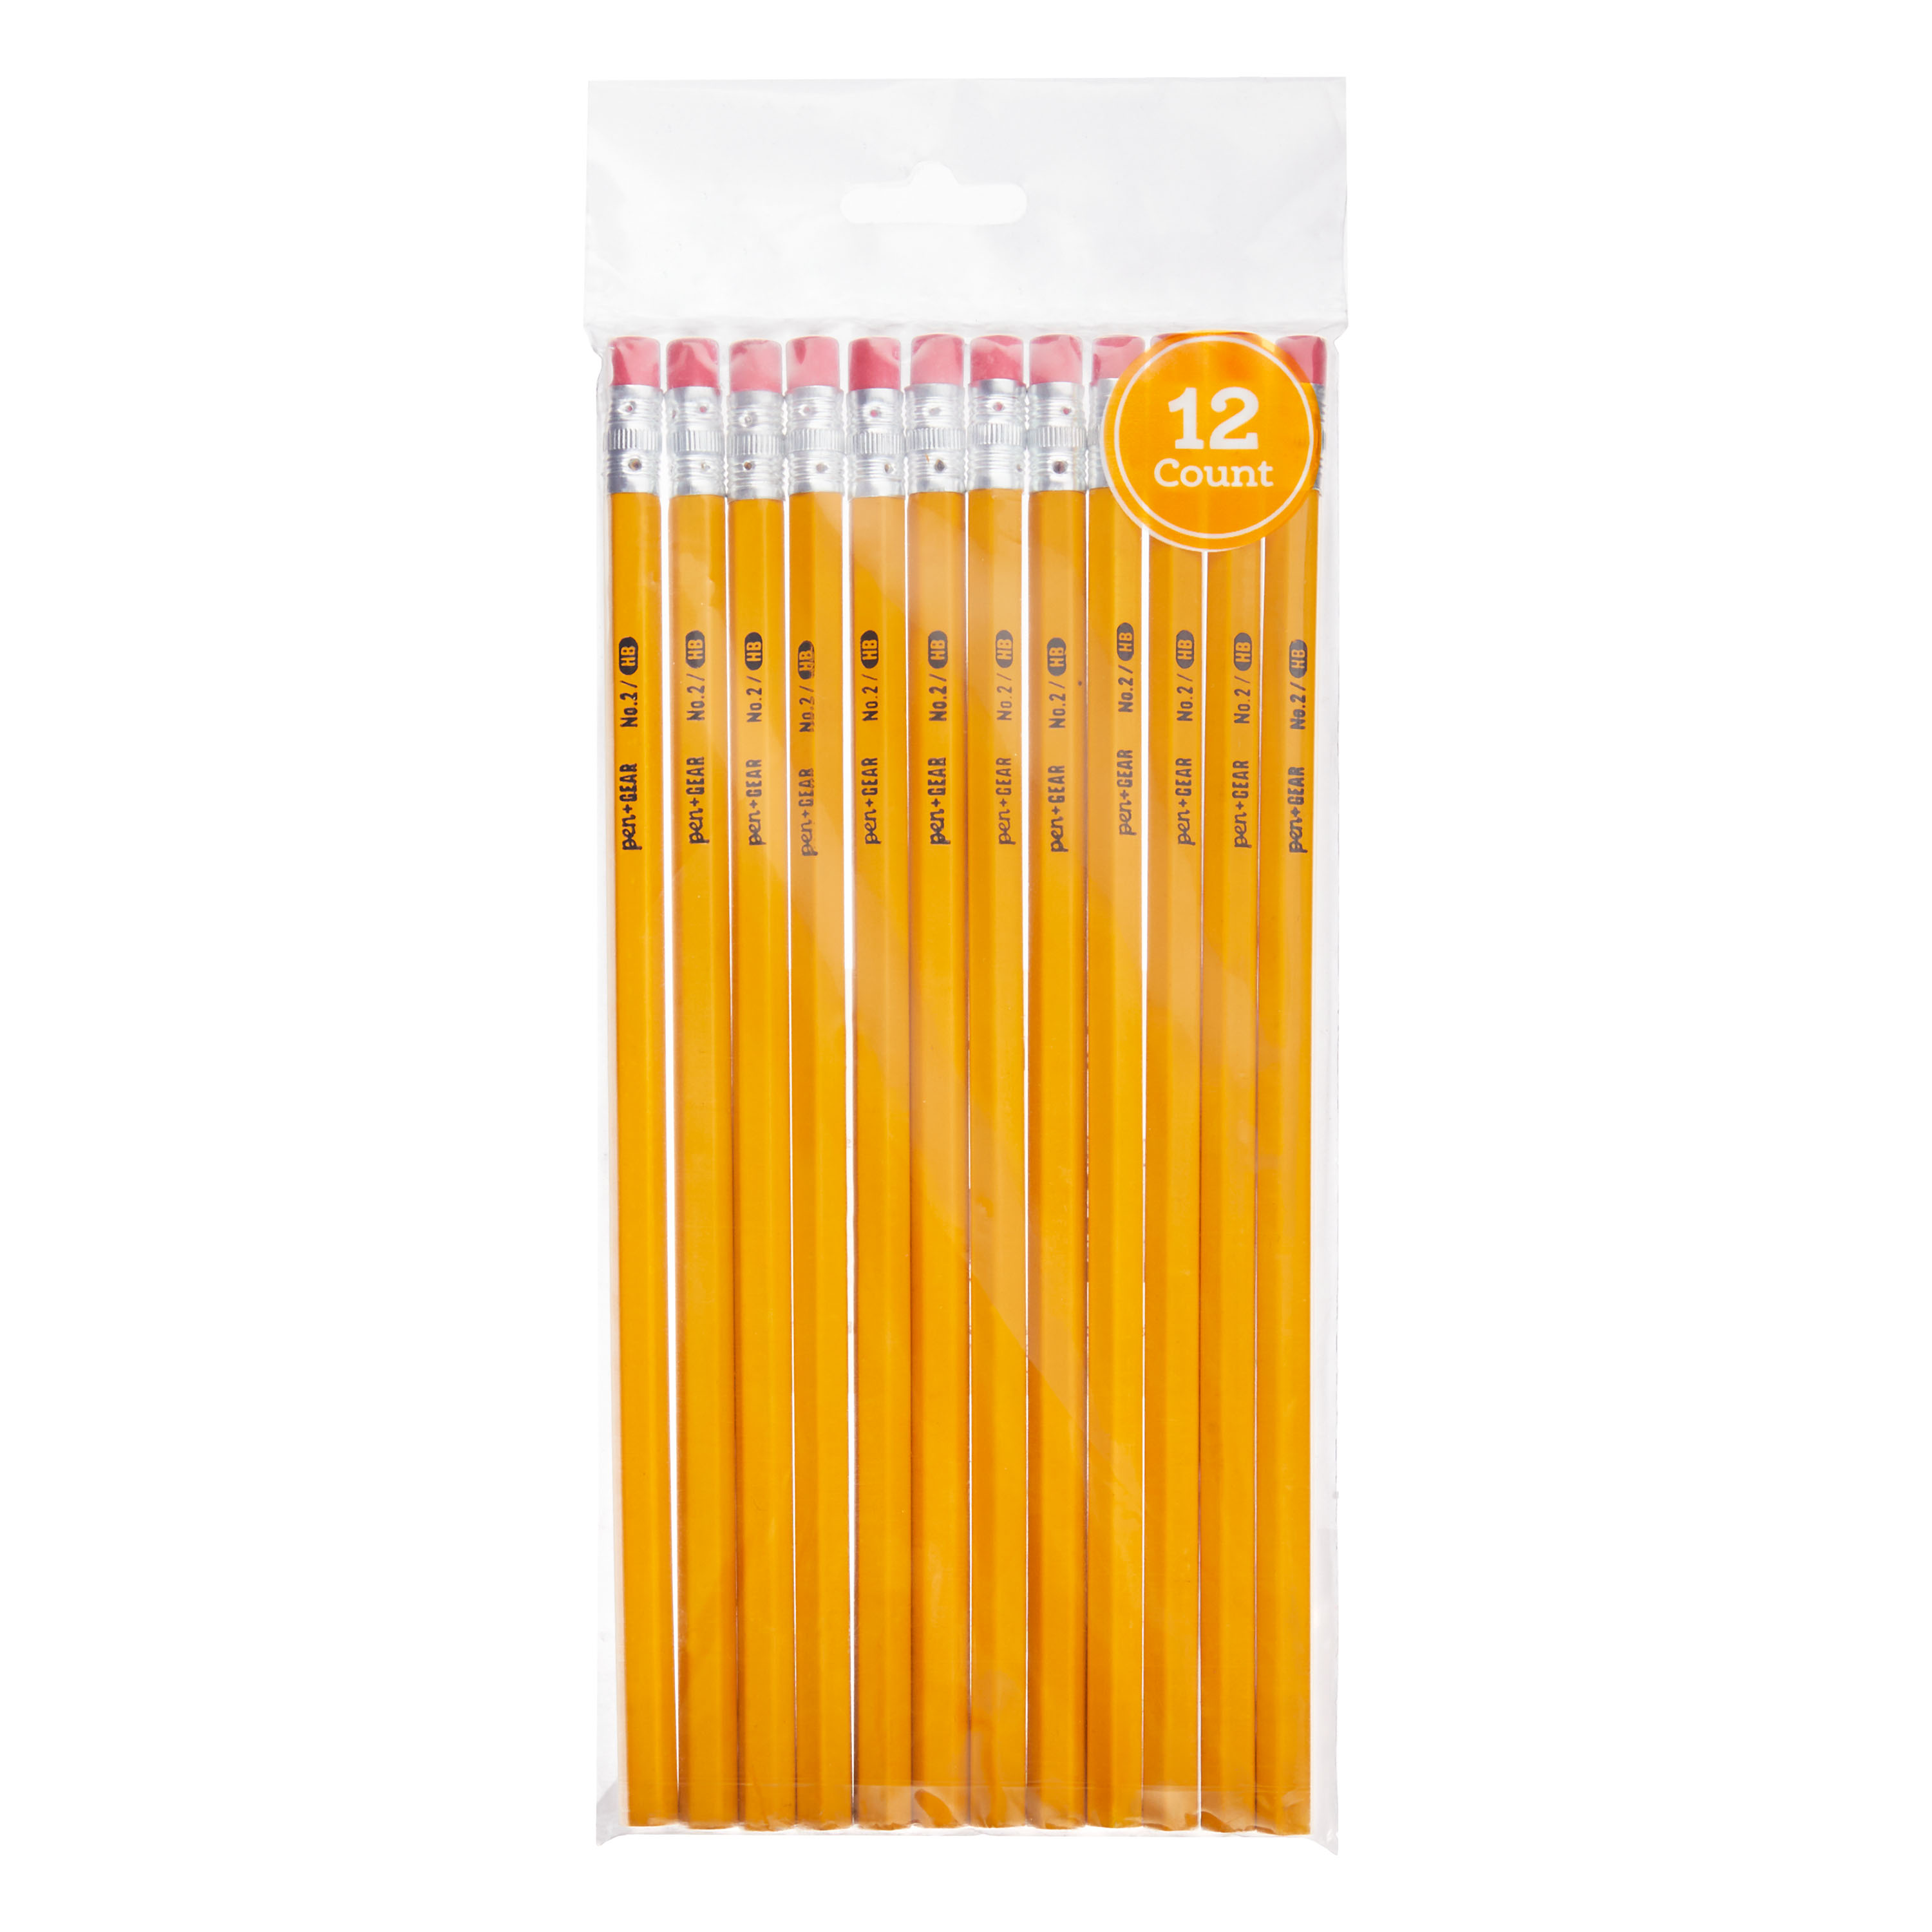 Pen+Gear No. 2 Wood Pencils, Unsharpened, 12 Count - image 1 of 6